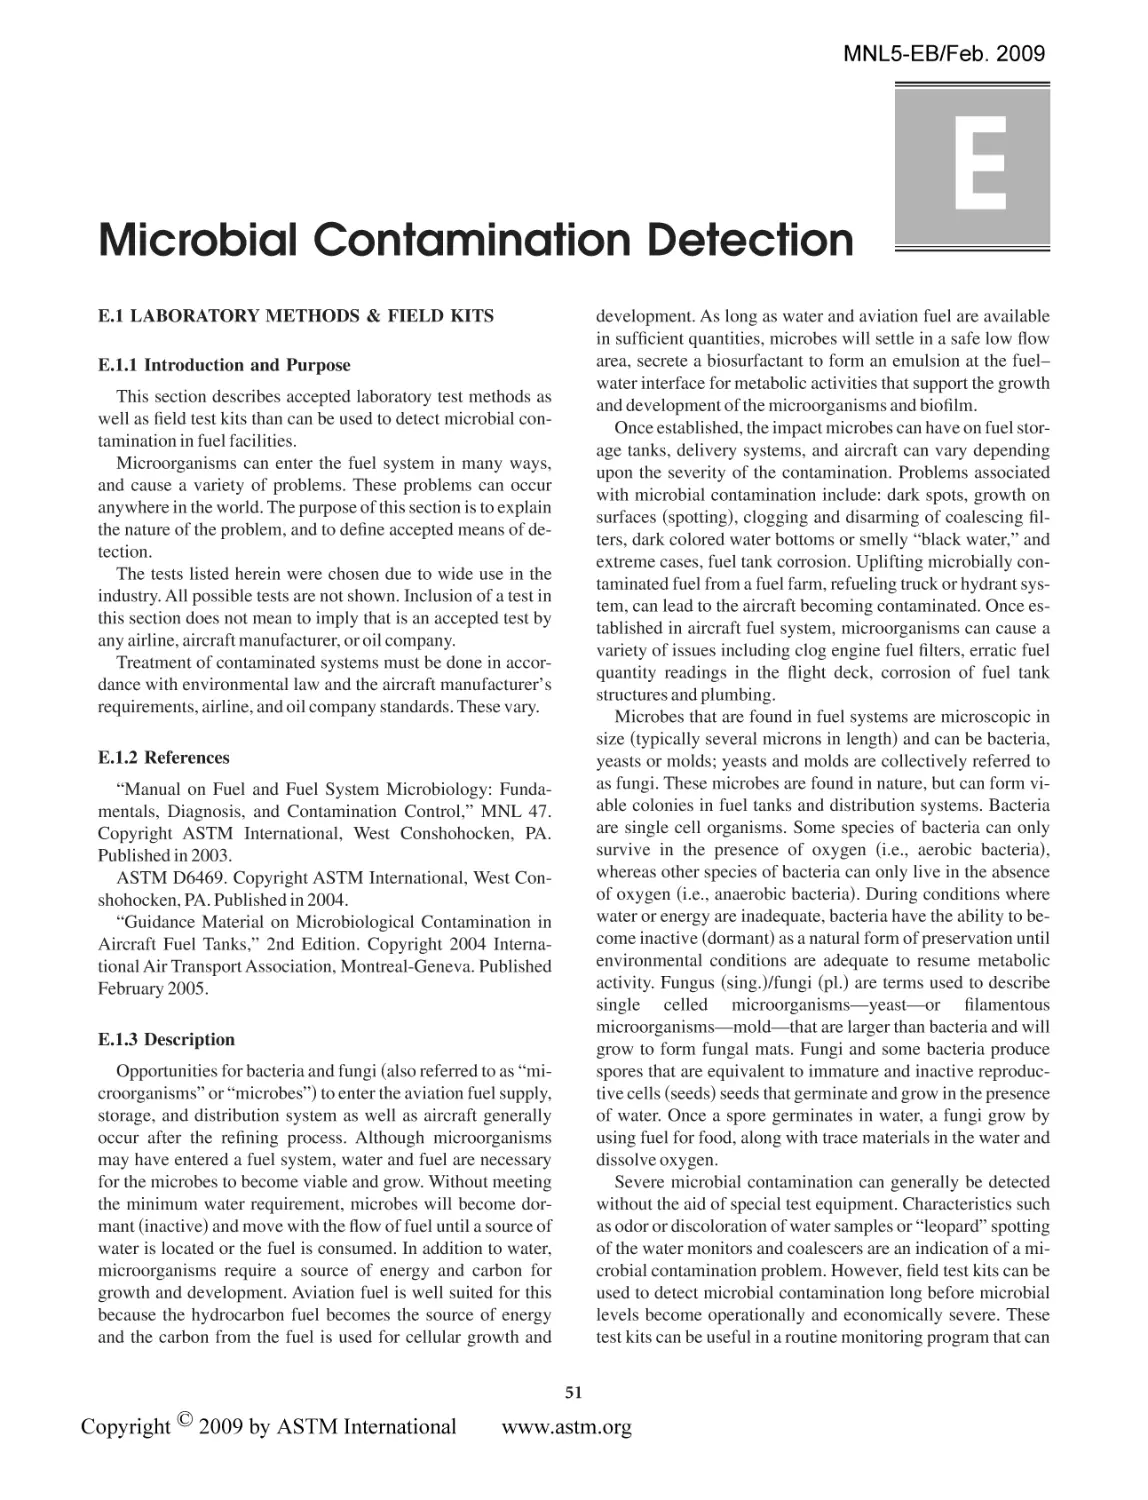 Microbial Contamination Detection